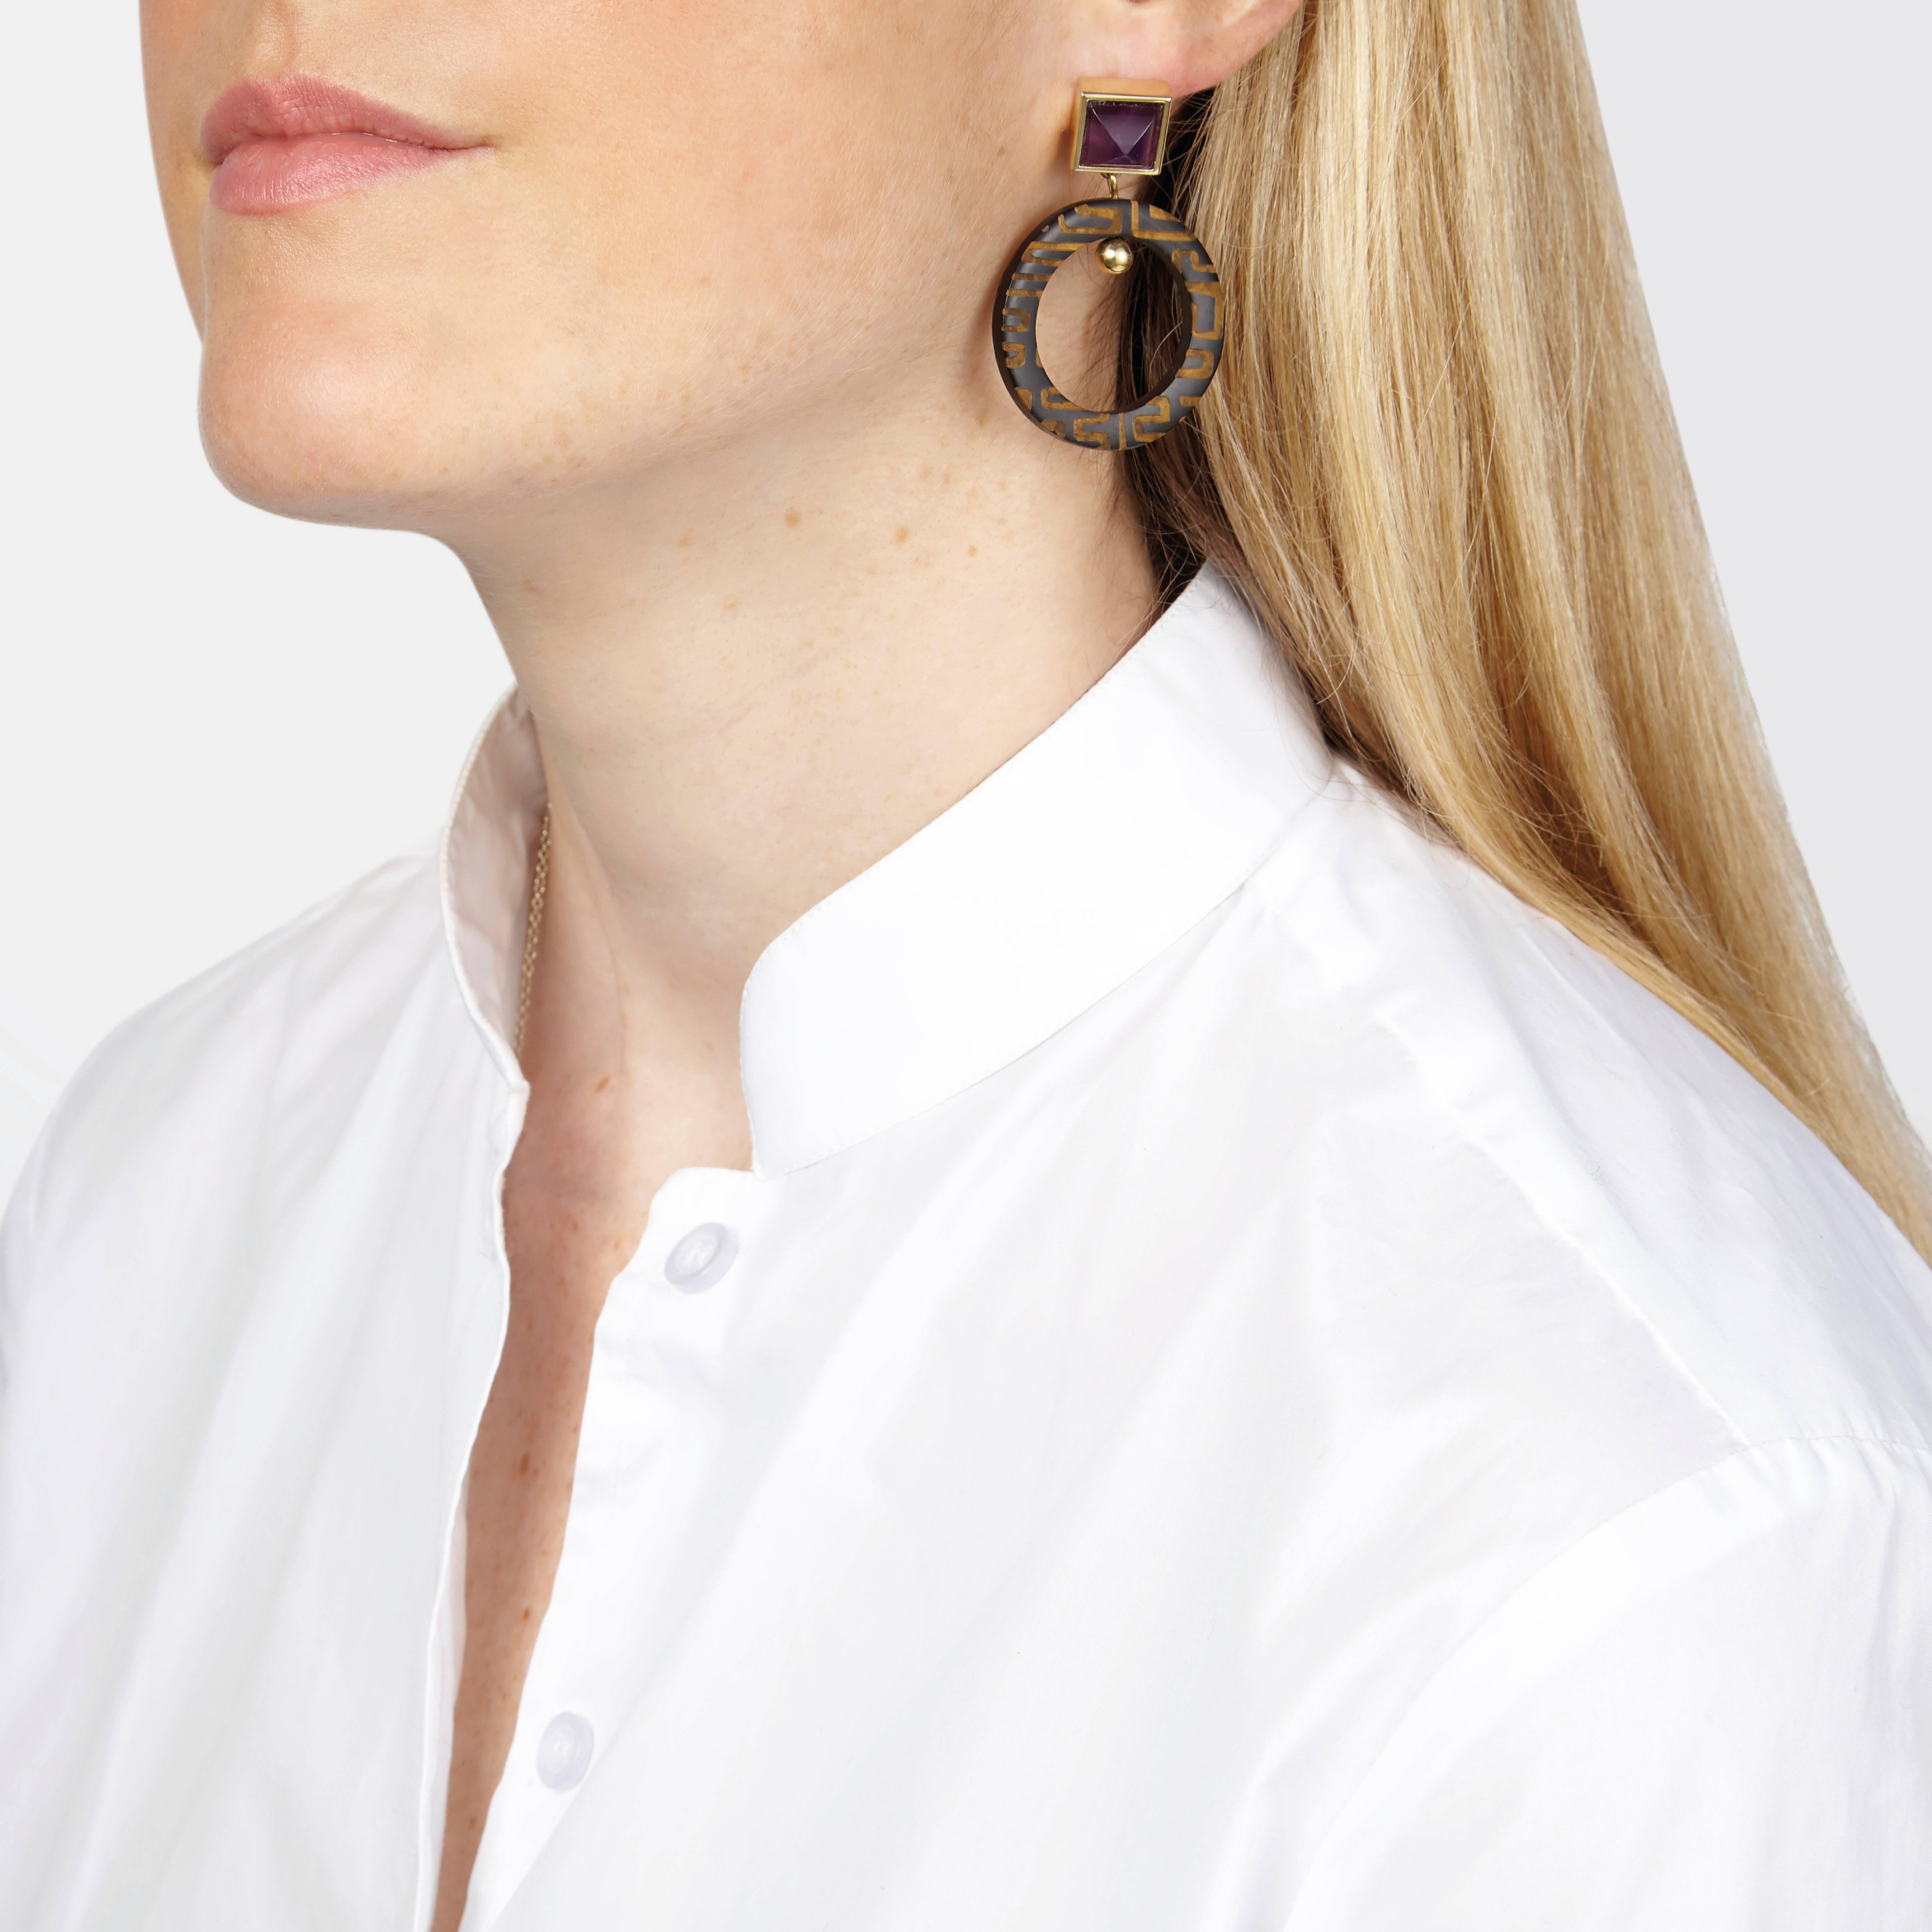 Earrings made of African cow horn and sugar-loaf shape amethyst. The engraving is inspired by West African Kuba textiles.

These engraved cow horn earrings are crafted by artisans in Kenya and finished by hand in London with solid silver pin-backs